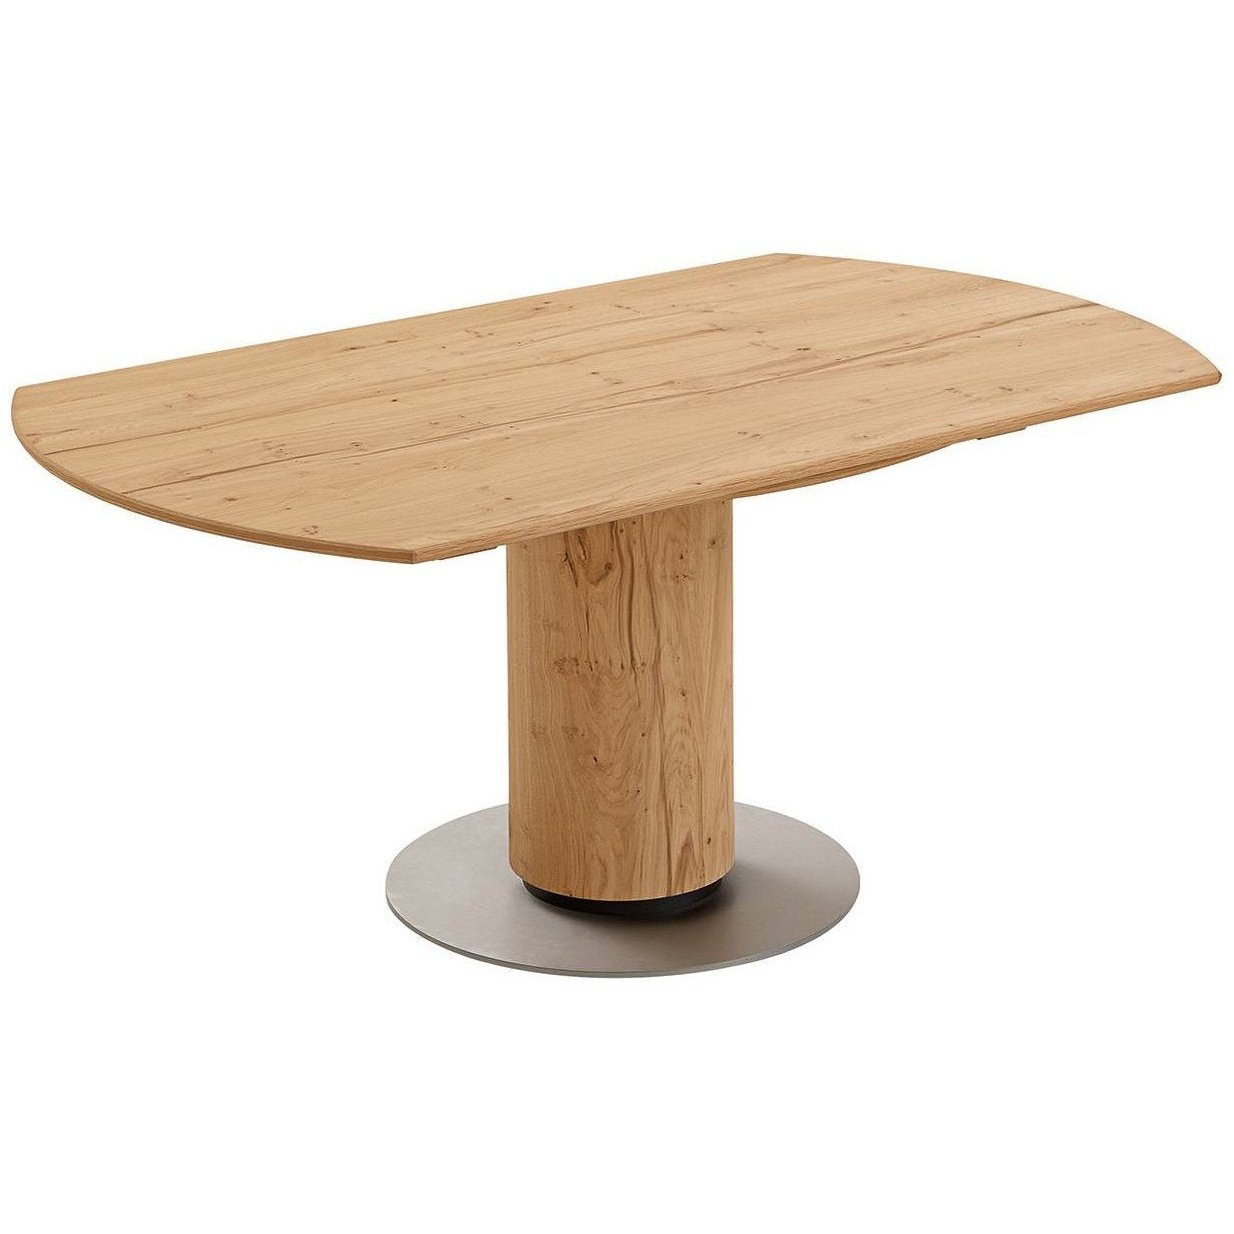 Venjakob Anna ET207 Small Dining Table